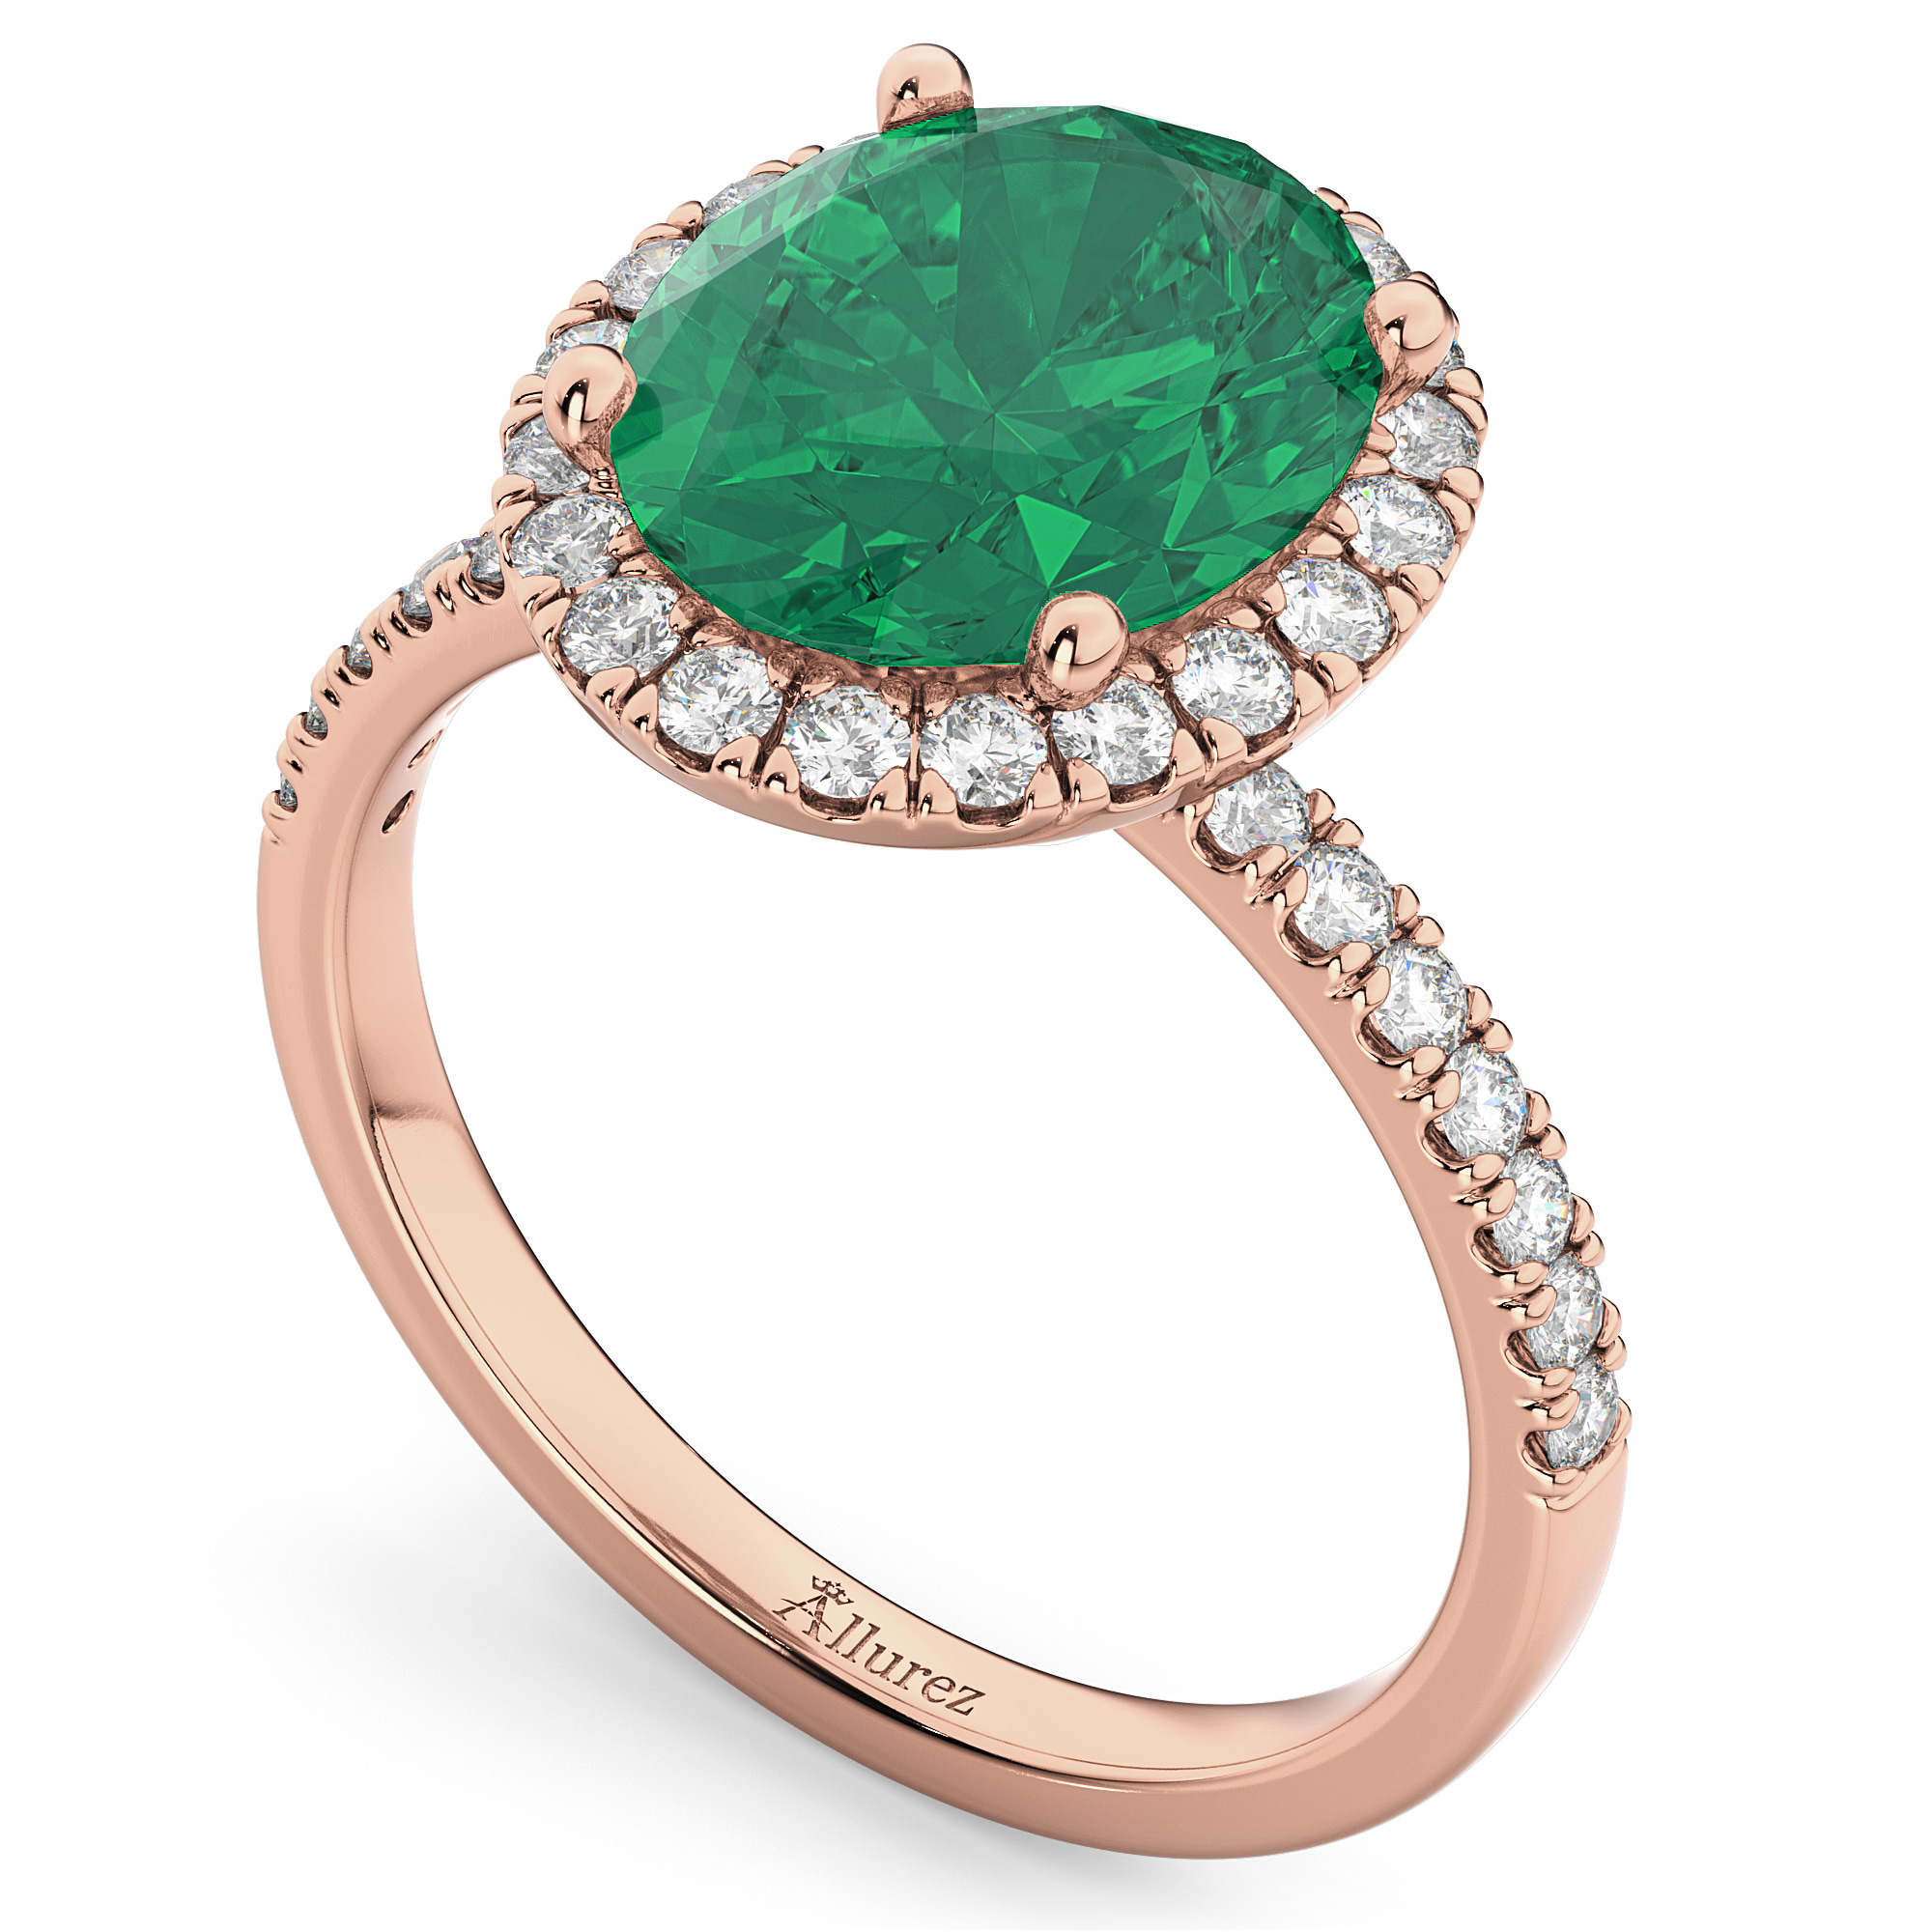 Oval Cut Halo Emerald & Diamond Engagement Ring 14K Rose Gold 3.11ct